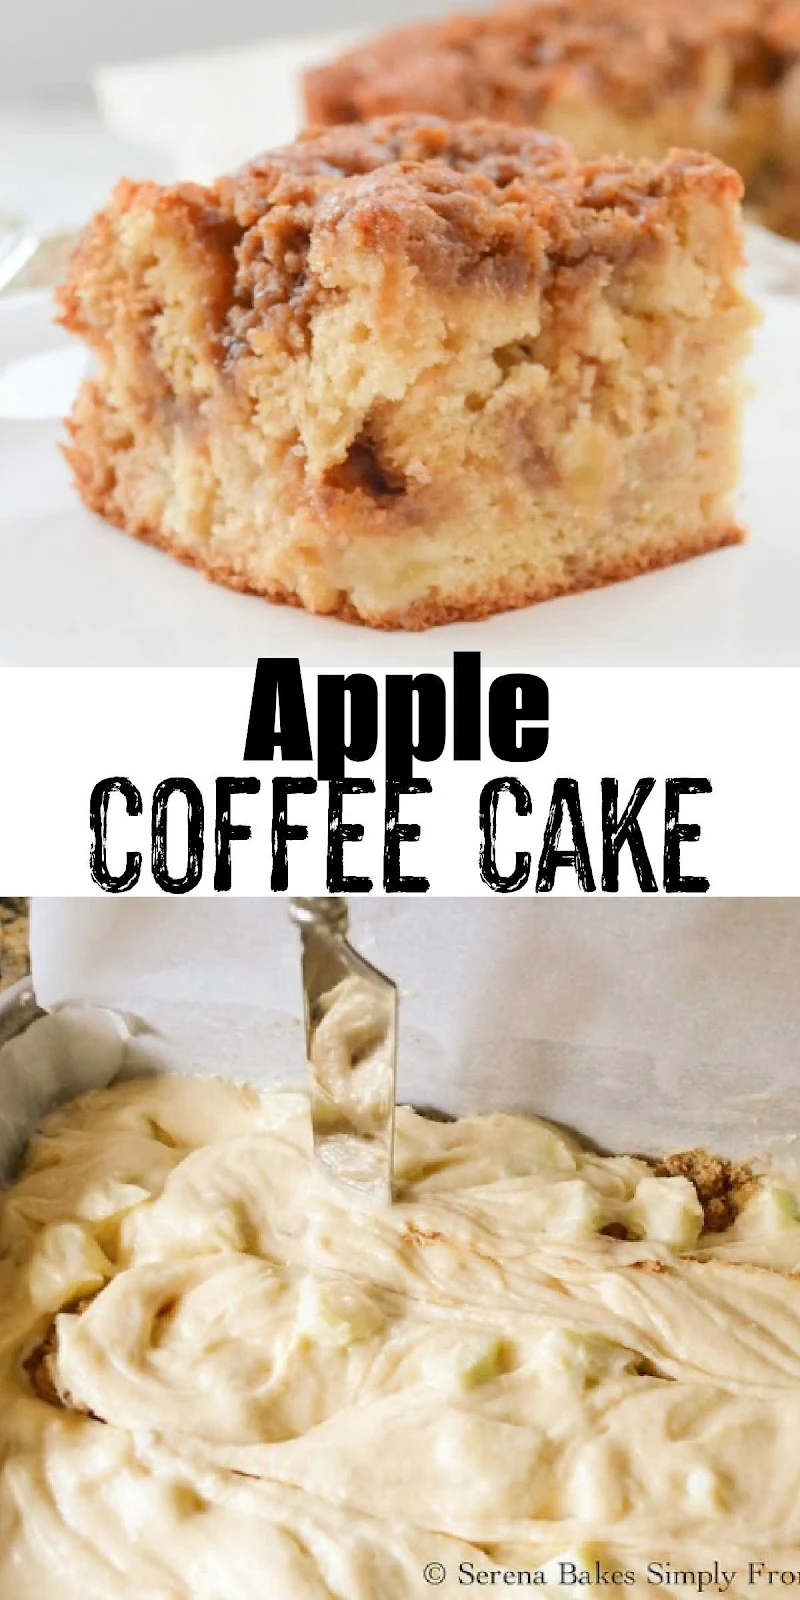 2 photos. The top photo is of a slice of Apple Coffee Cake on a white plate. The bottom photo is of Apple Coffee Cake batter in a pan being swirled with a knife. There is a white banner between the two photos with black text Apple Coffee Cake.